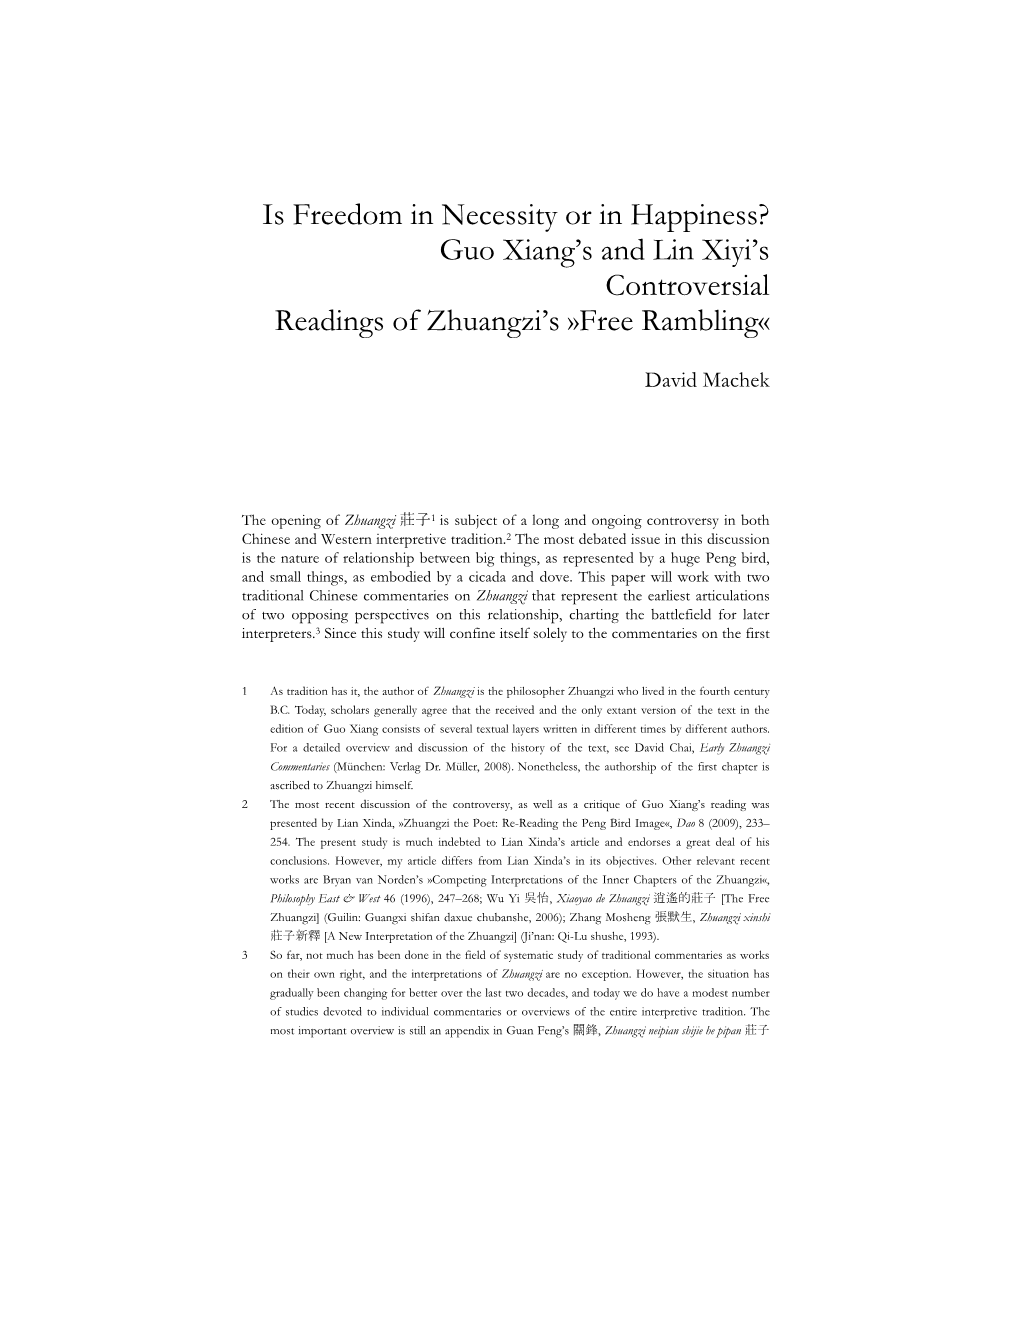 Is Freedom in Necessity Or in Happiness? Guo Xiang's and Lin Xiyi's Controversial Readings of Zhuangzi's »Free Rambling«